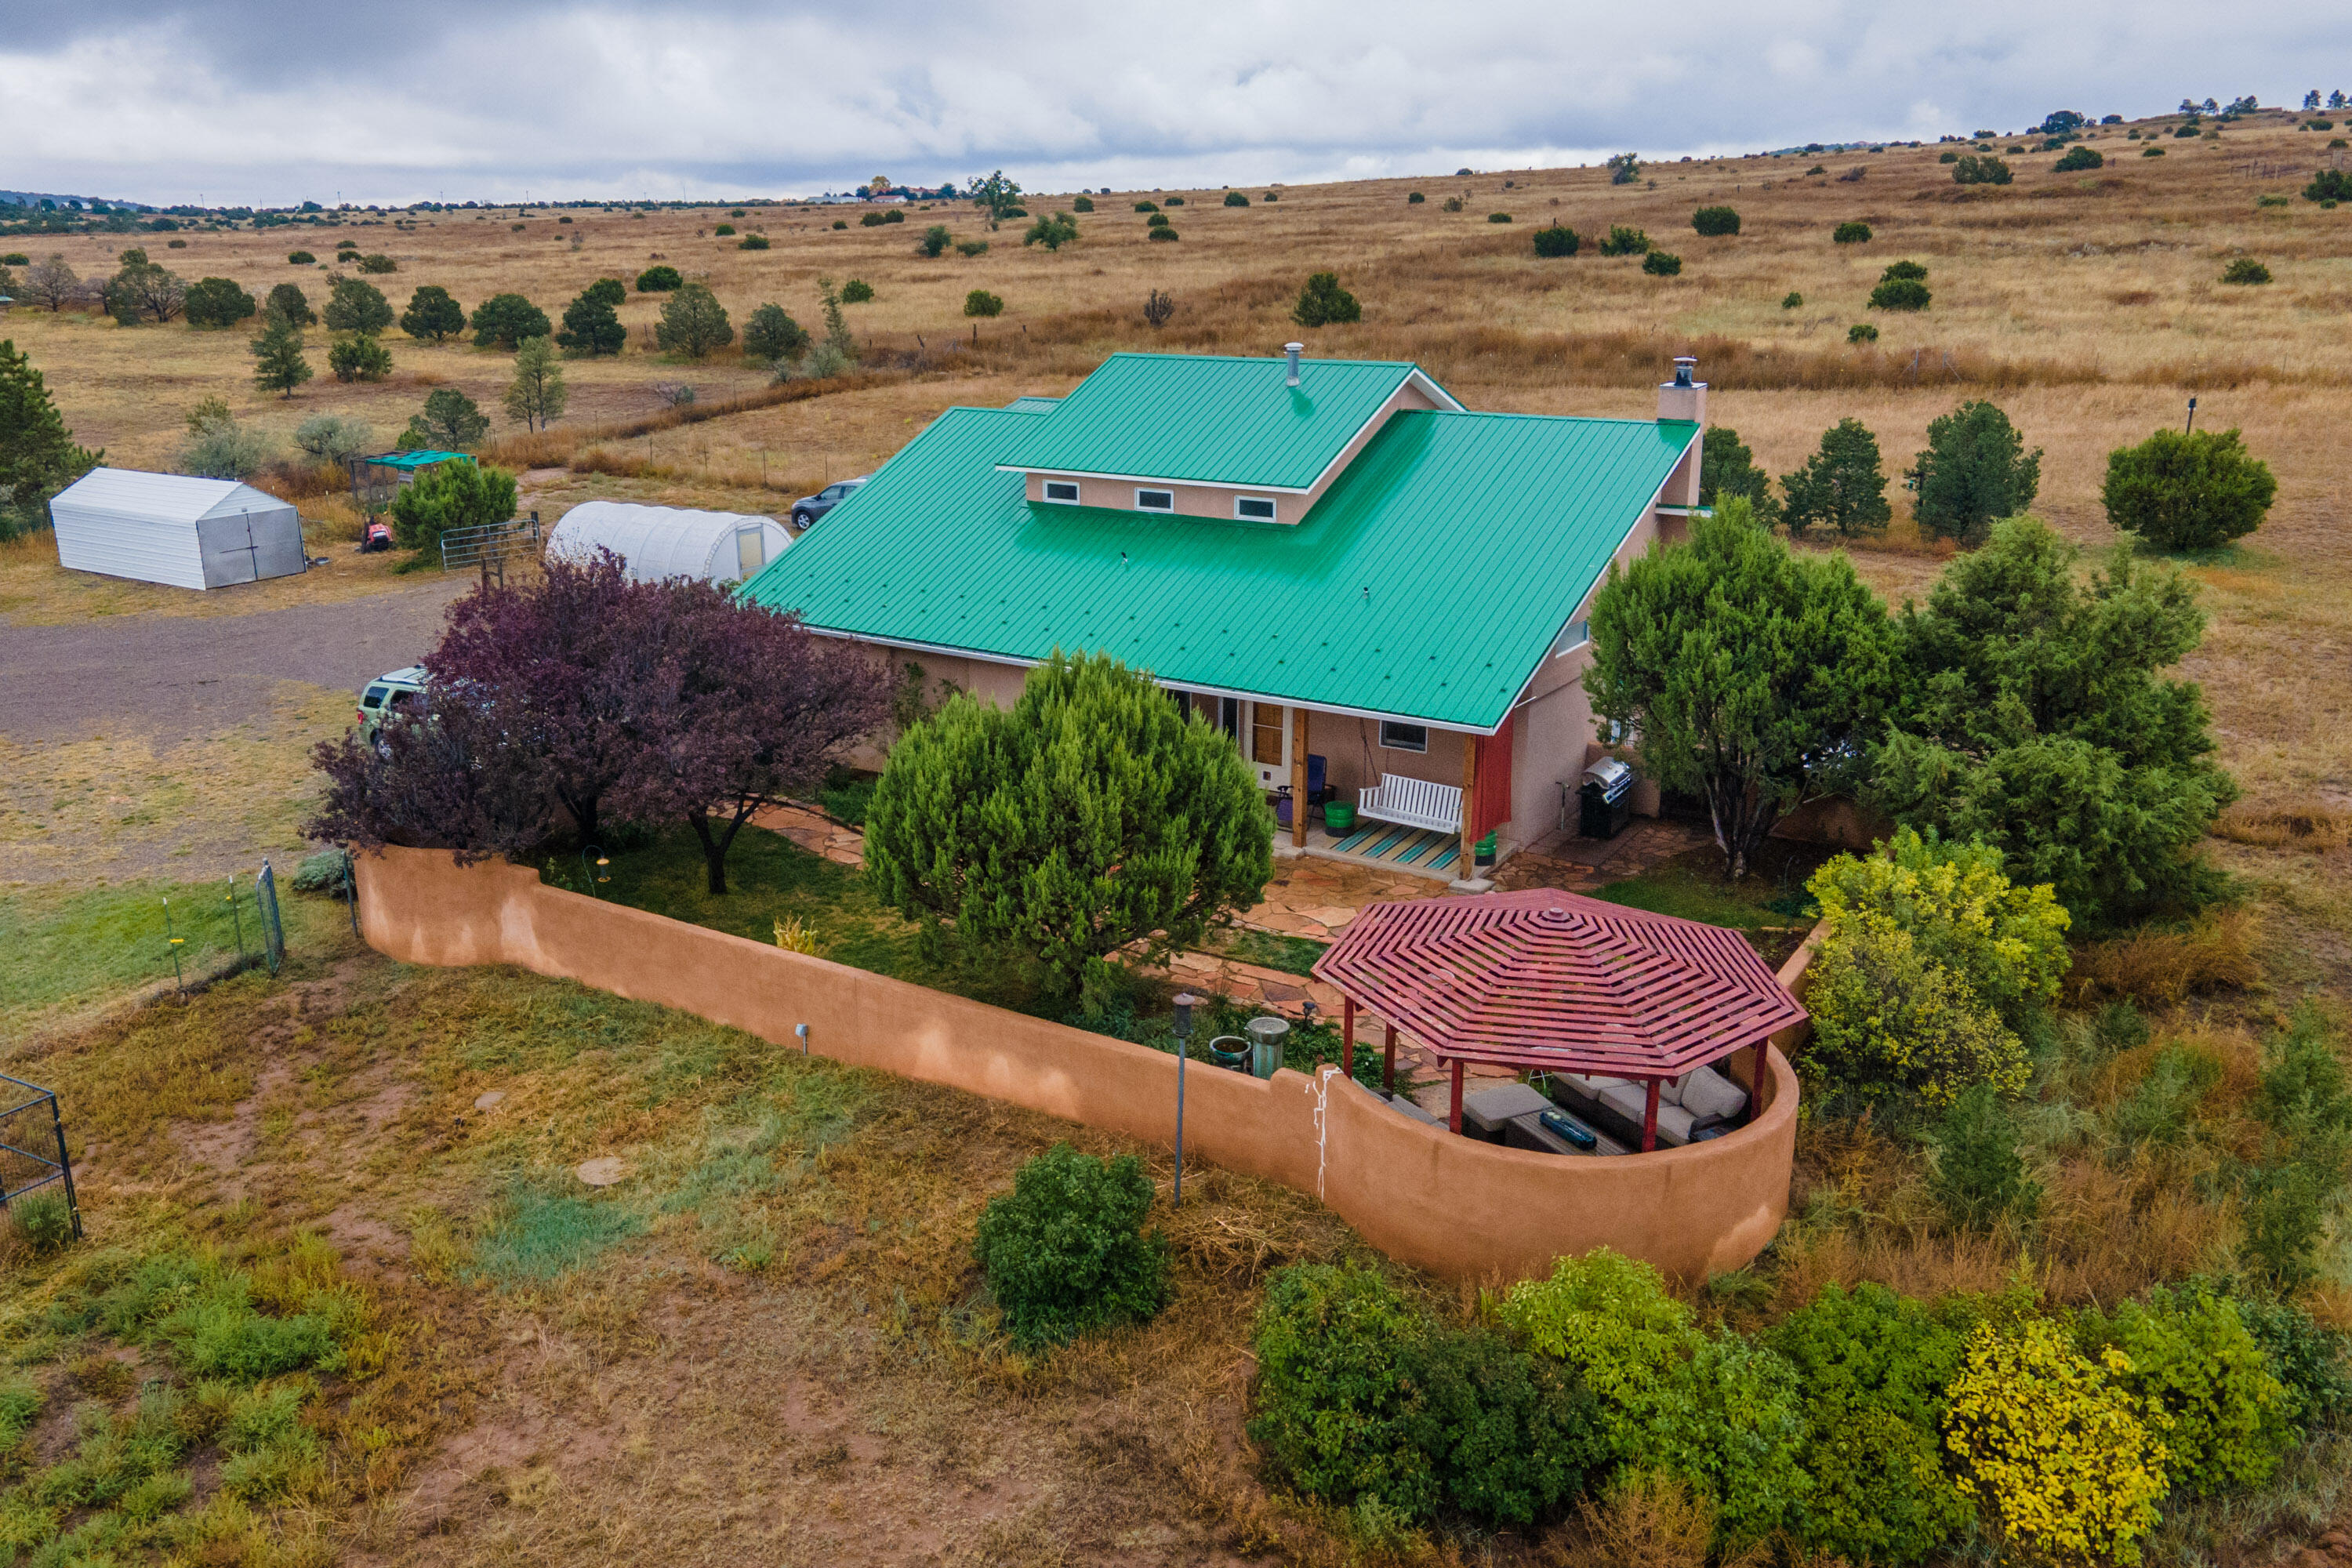 OPEN SUN 12/4- 12-3 pm. This gorgeous property consists of 5 beautiful acres (2.5 acres fenced) with a large main house boasting 3 beds, 2 full baths (1927 sq ft) and nearby casita with 1 bed, full bath and kitchen (659 sq ft). Perfect for multi generational living or a great rental opportunity. Built with passive solar, cross ventilation cooling, & 12'' thick walls, the main house has energy efficiency, and incredible mountain views.  It is also open concept with soaring ceilings. The casita is fully functional & cozy. Close to I-40, with Comcast internet, lovely outdoor living spaces & greenhouse gardens, this property is versatile, turnkey & comprehensive to all your mountain living dreams. Water heater, furnace & stove replaced in 2021. Come make this lovely property your mountain home